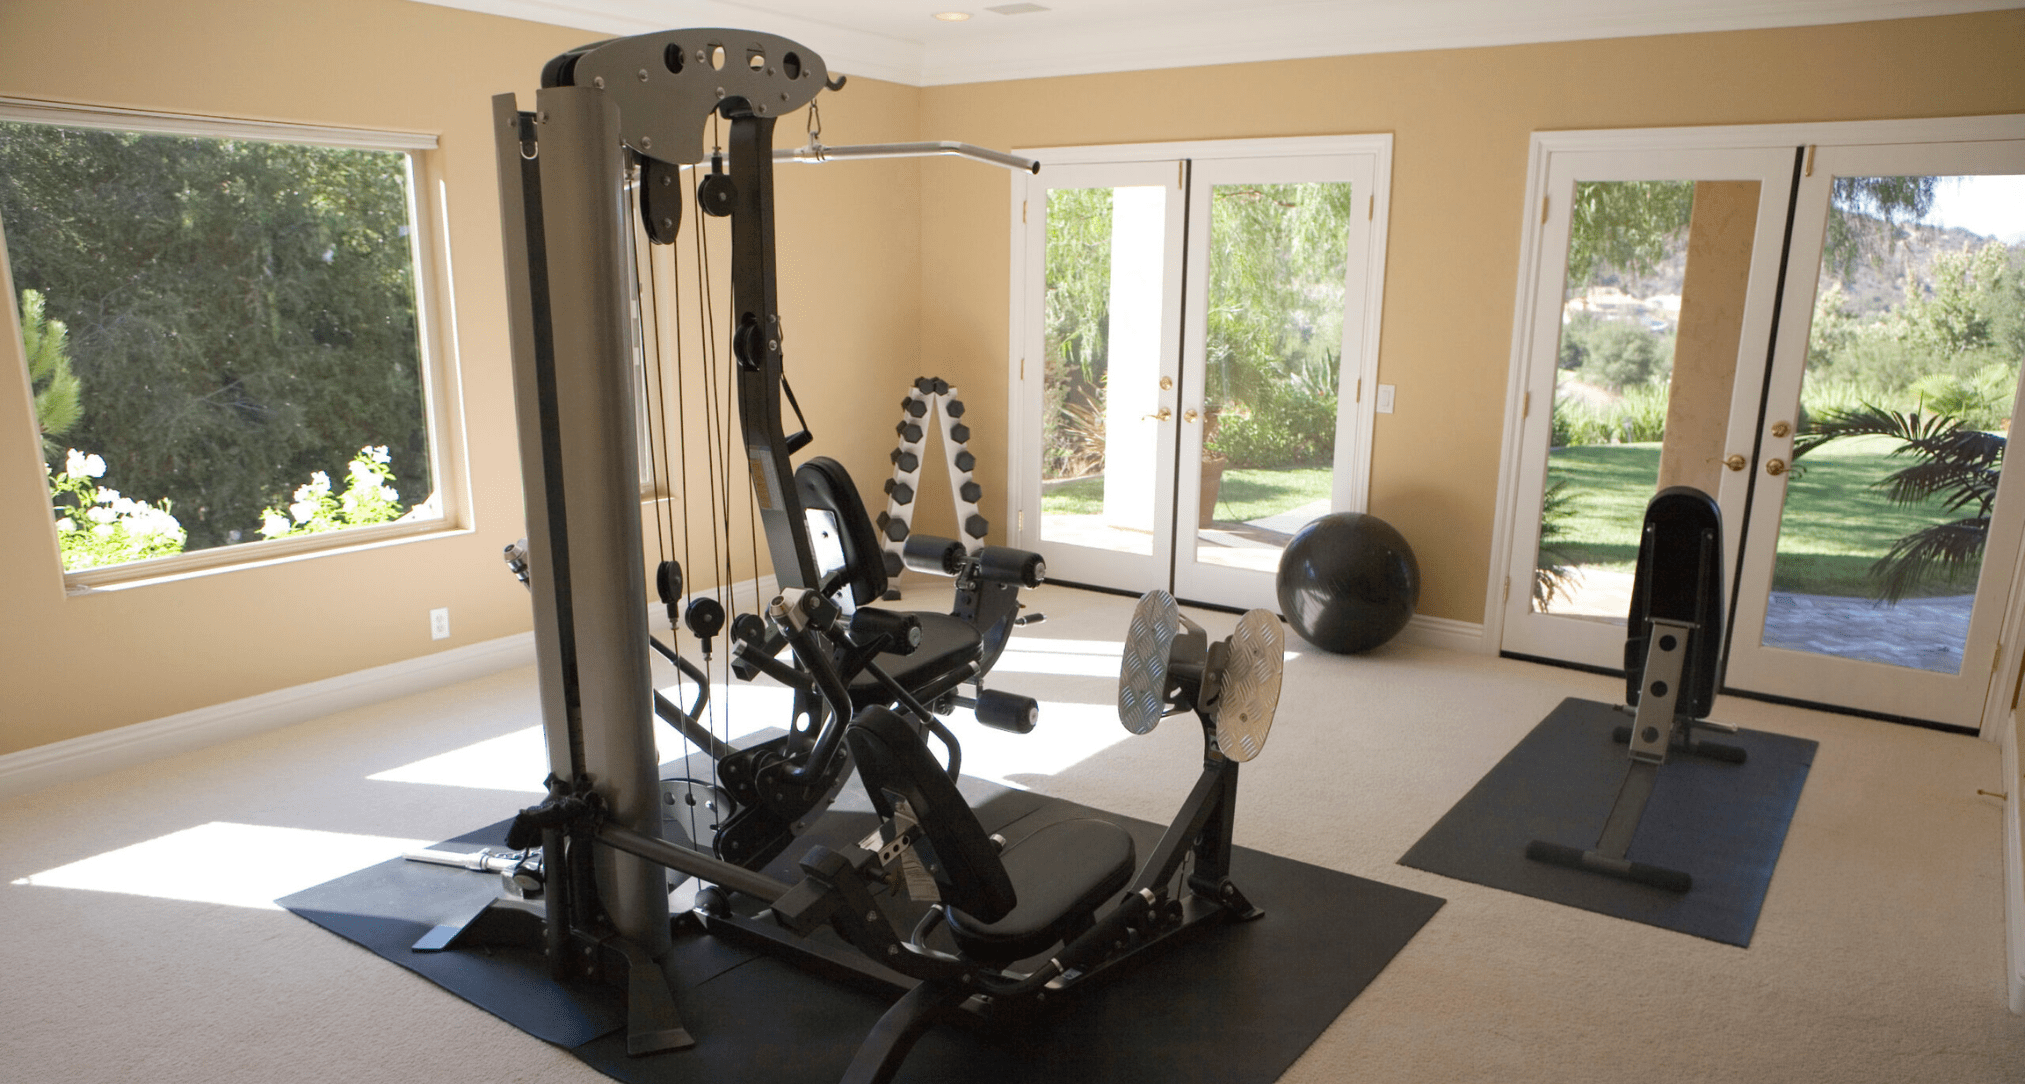 Image of a multi-gym piece of weight equipment in a home gym.